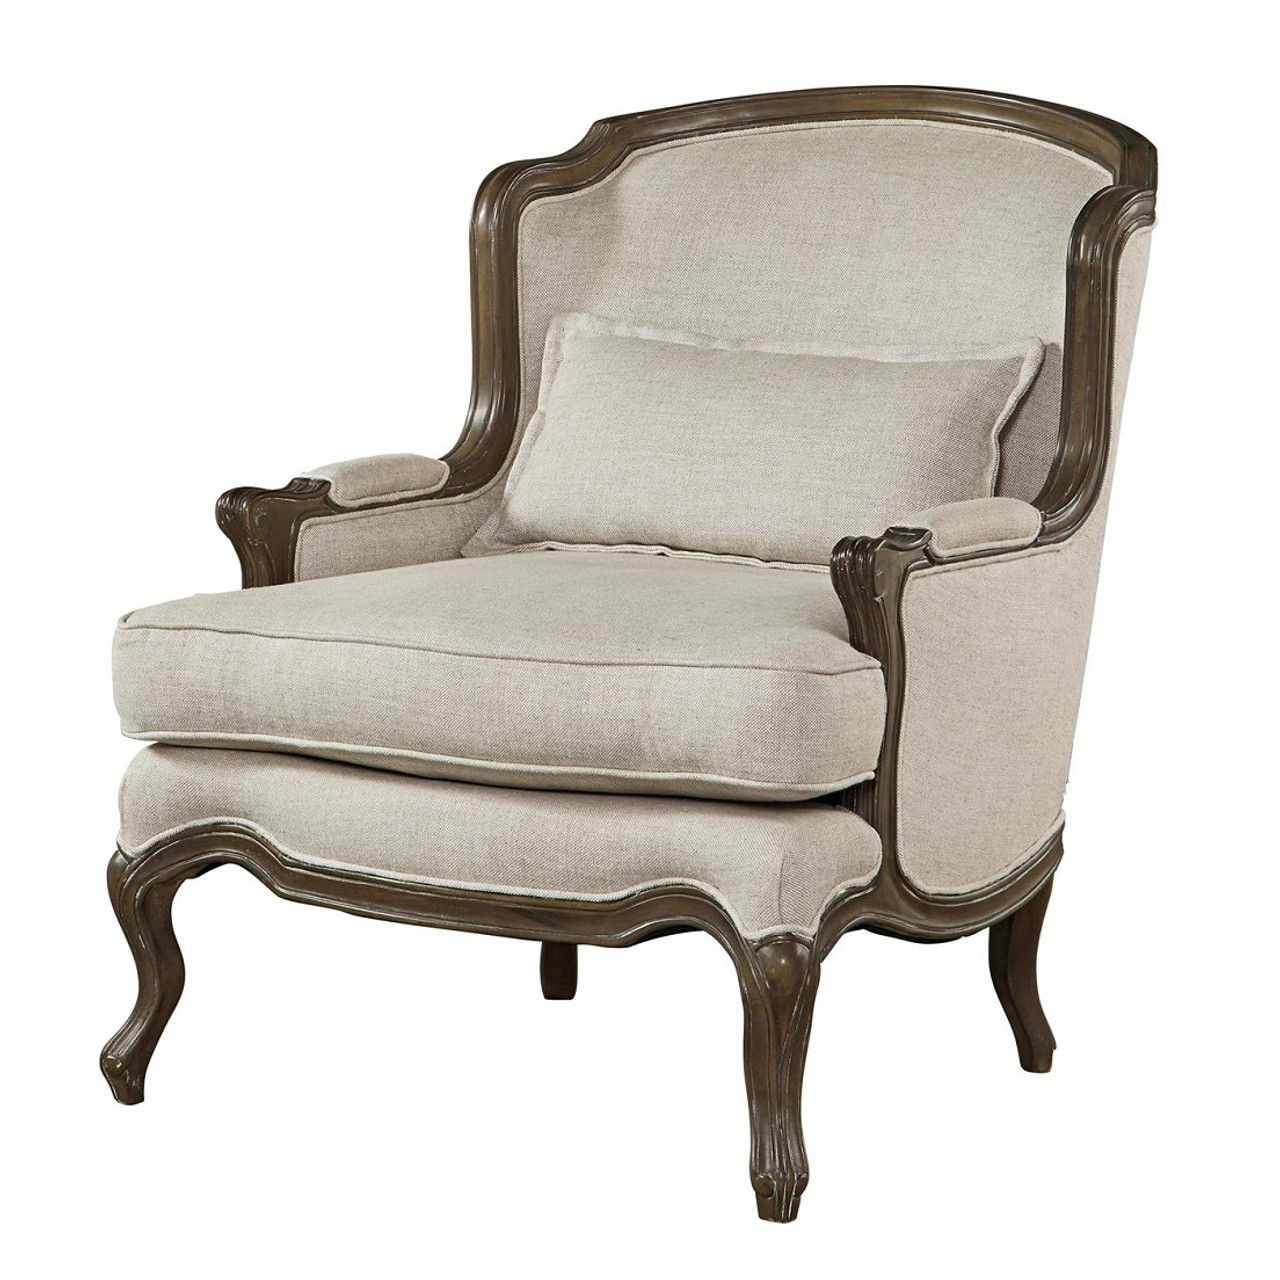 Harrison French Country Linen Accent Chair | Zin Home